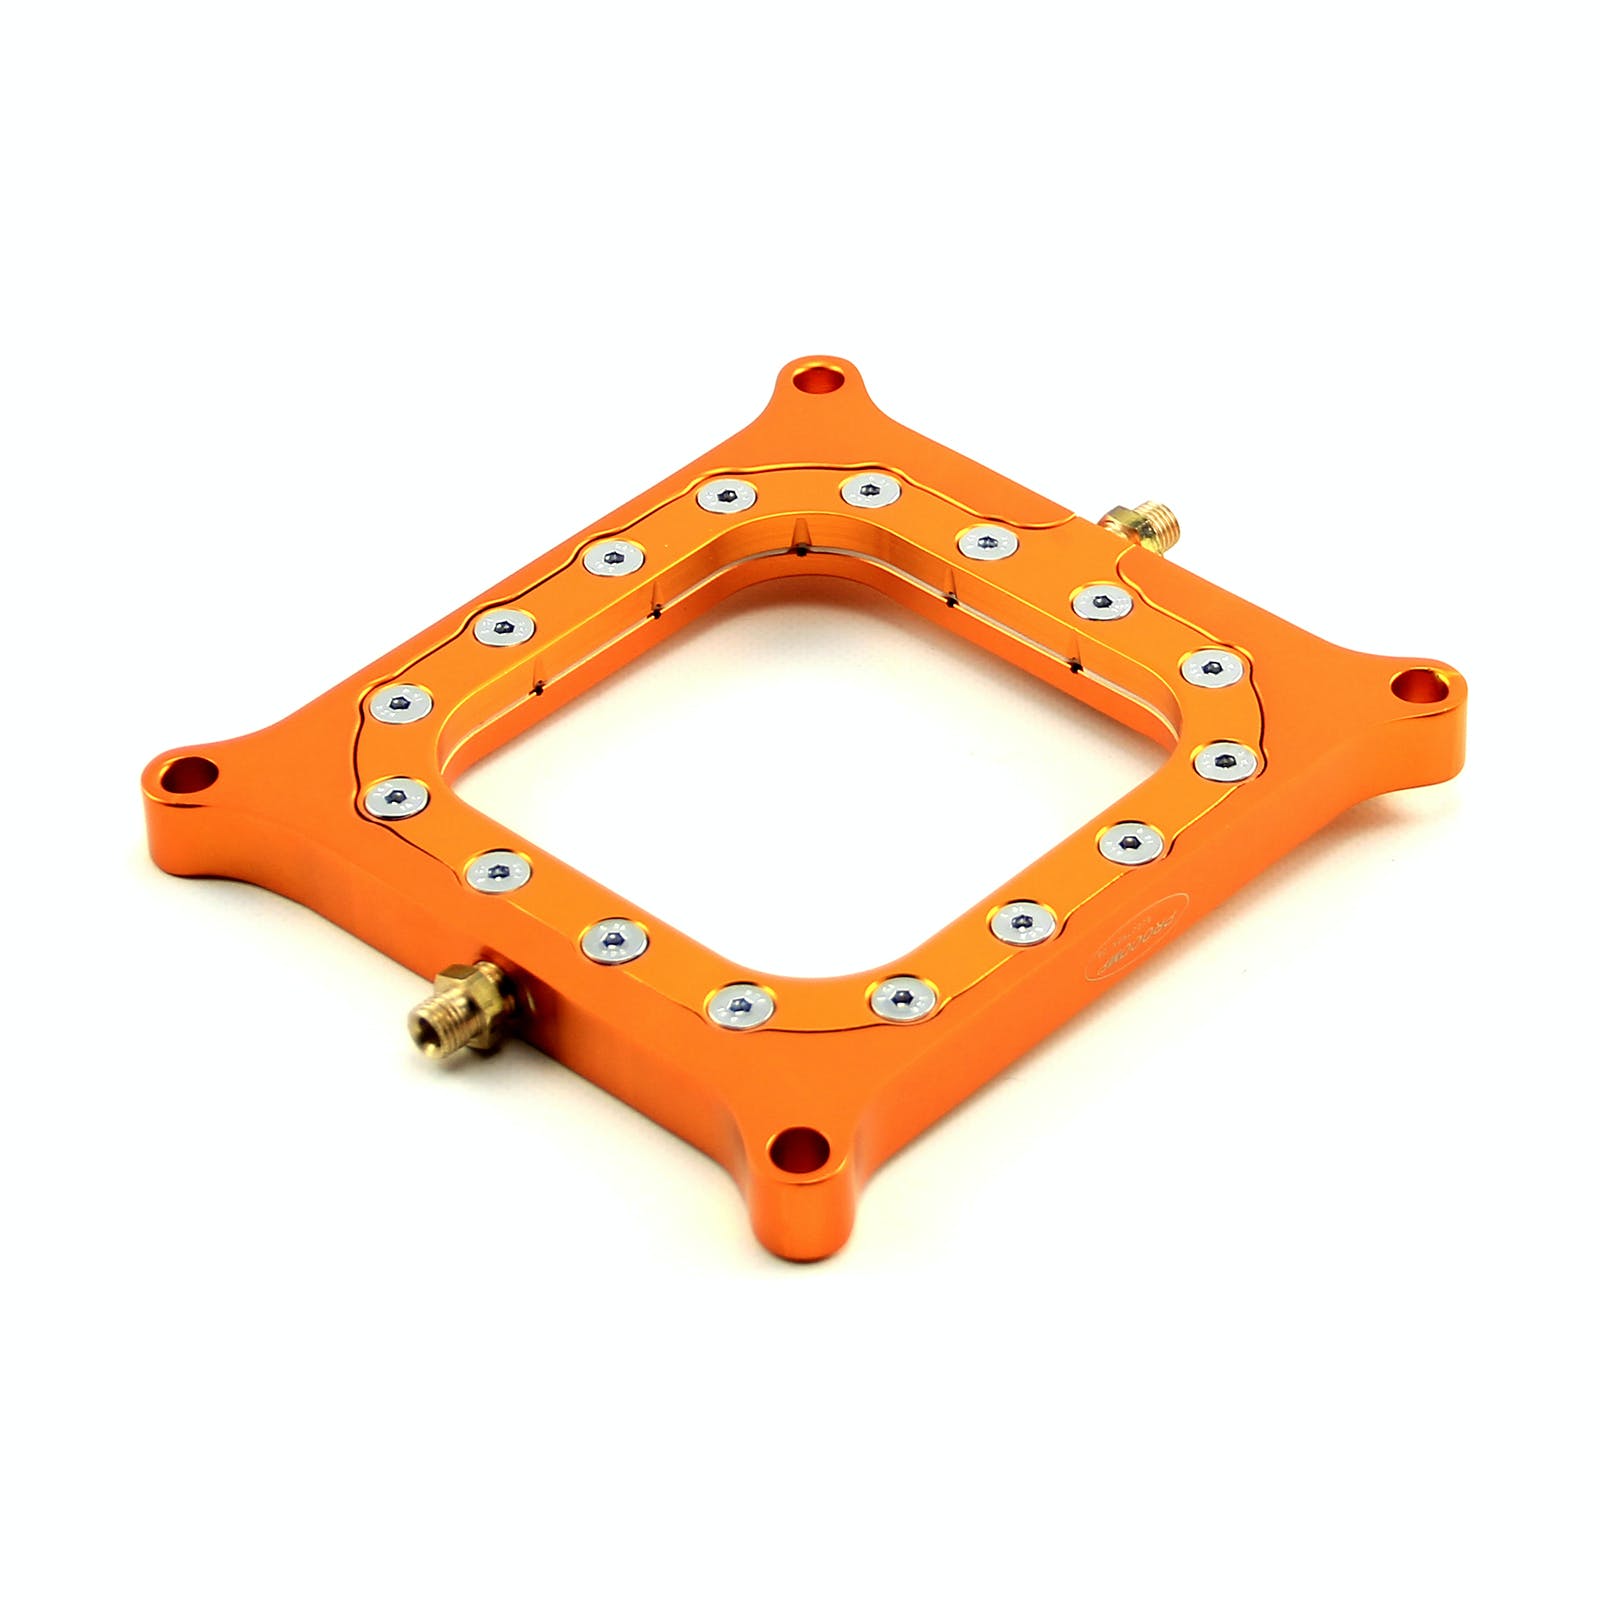 Speedmaster PCE151.1003 Nitrous Oxide 0.500 Yellow Billet Square Bore Perimeter Injection Spacer Plate